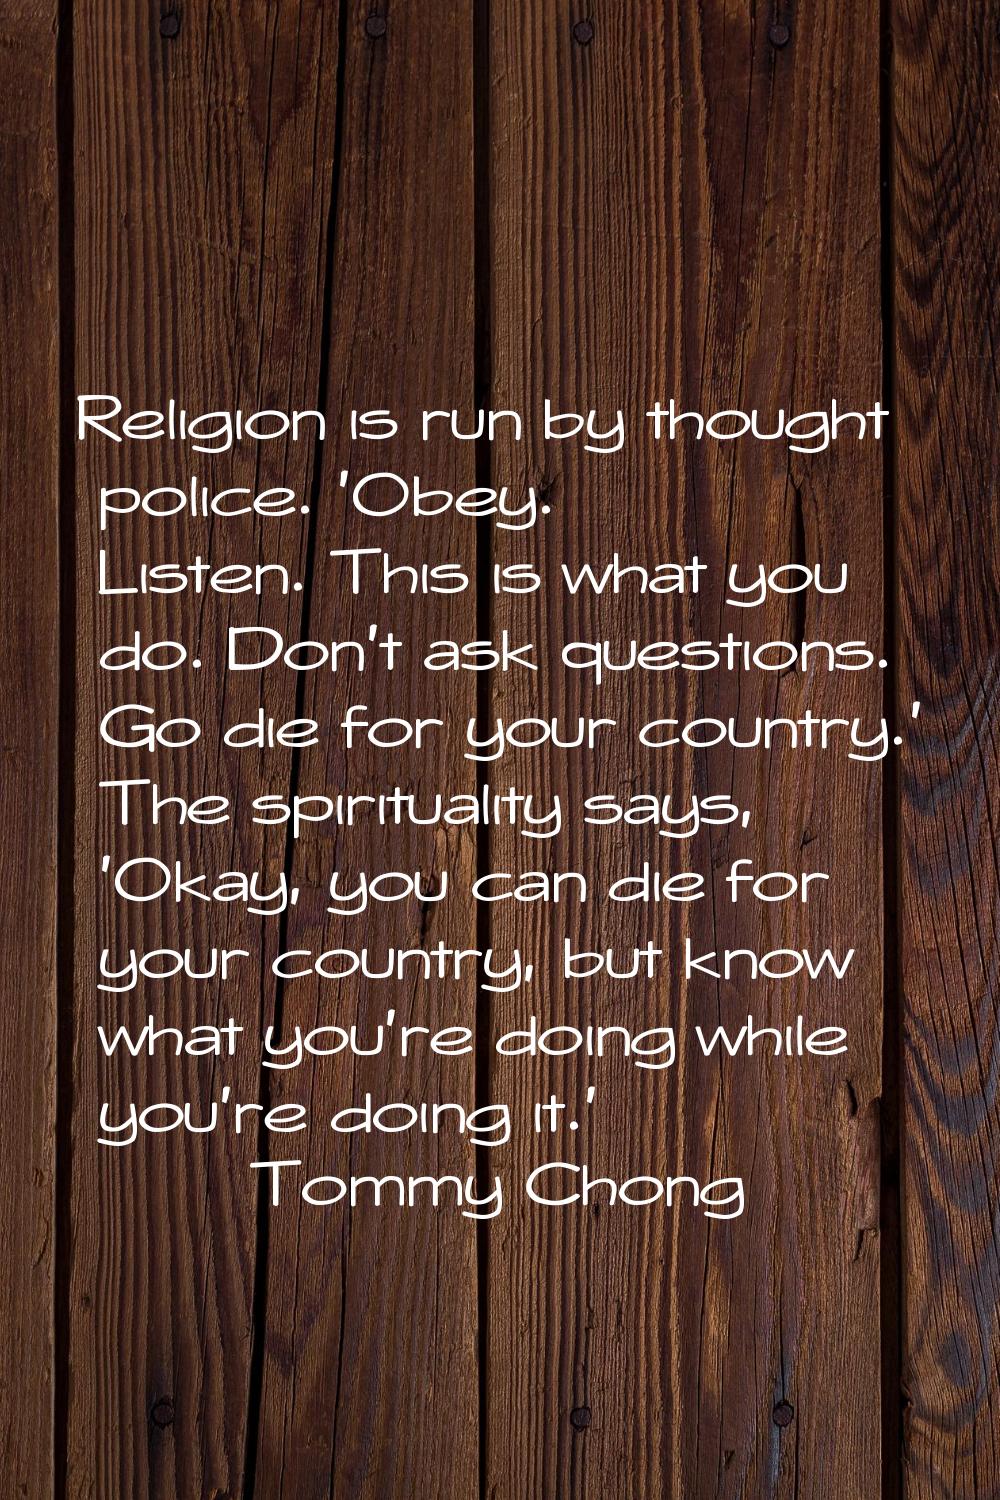 Religion is run by thought police. 'Obey. Listen. This is what you do. Don't ask questions. Go die 